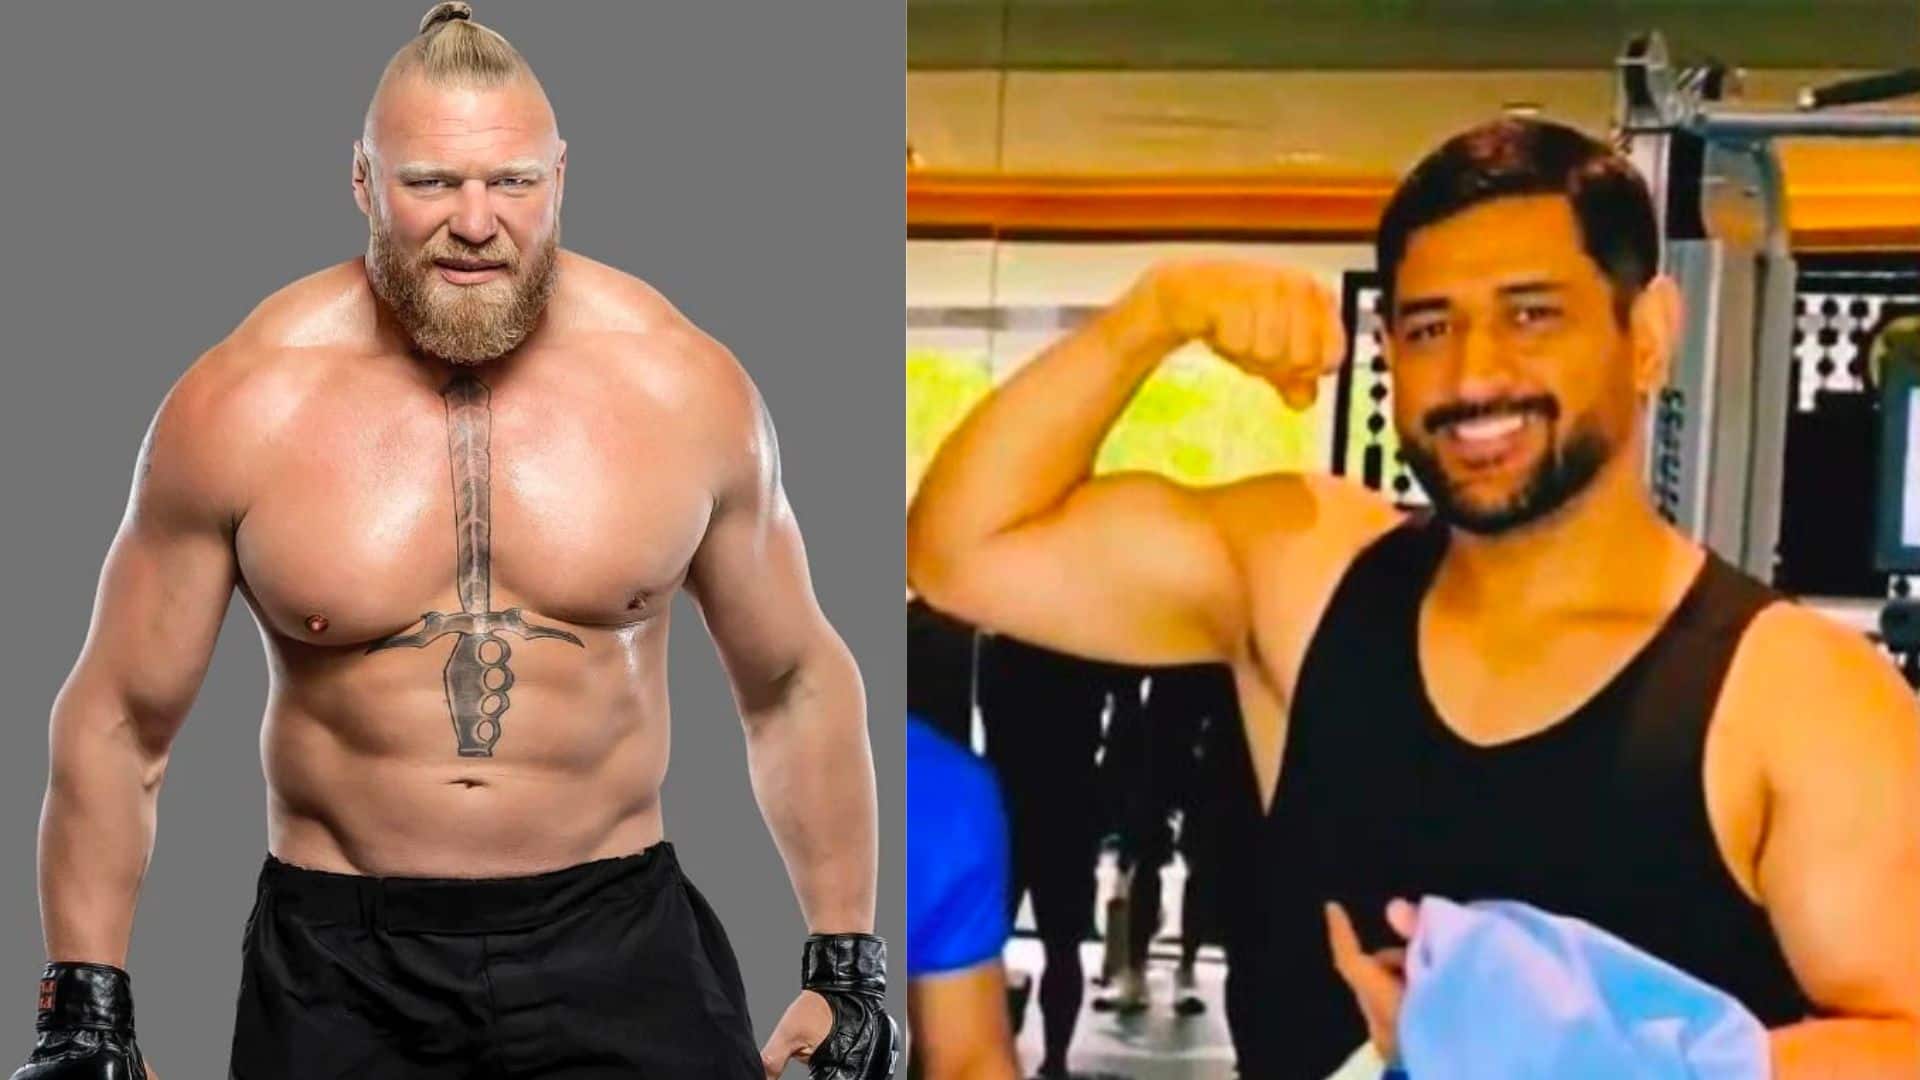 [Watch] MS Dhoni Becomes India's Brock Lesnar; Woos Crowd At An Event